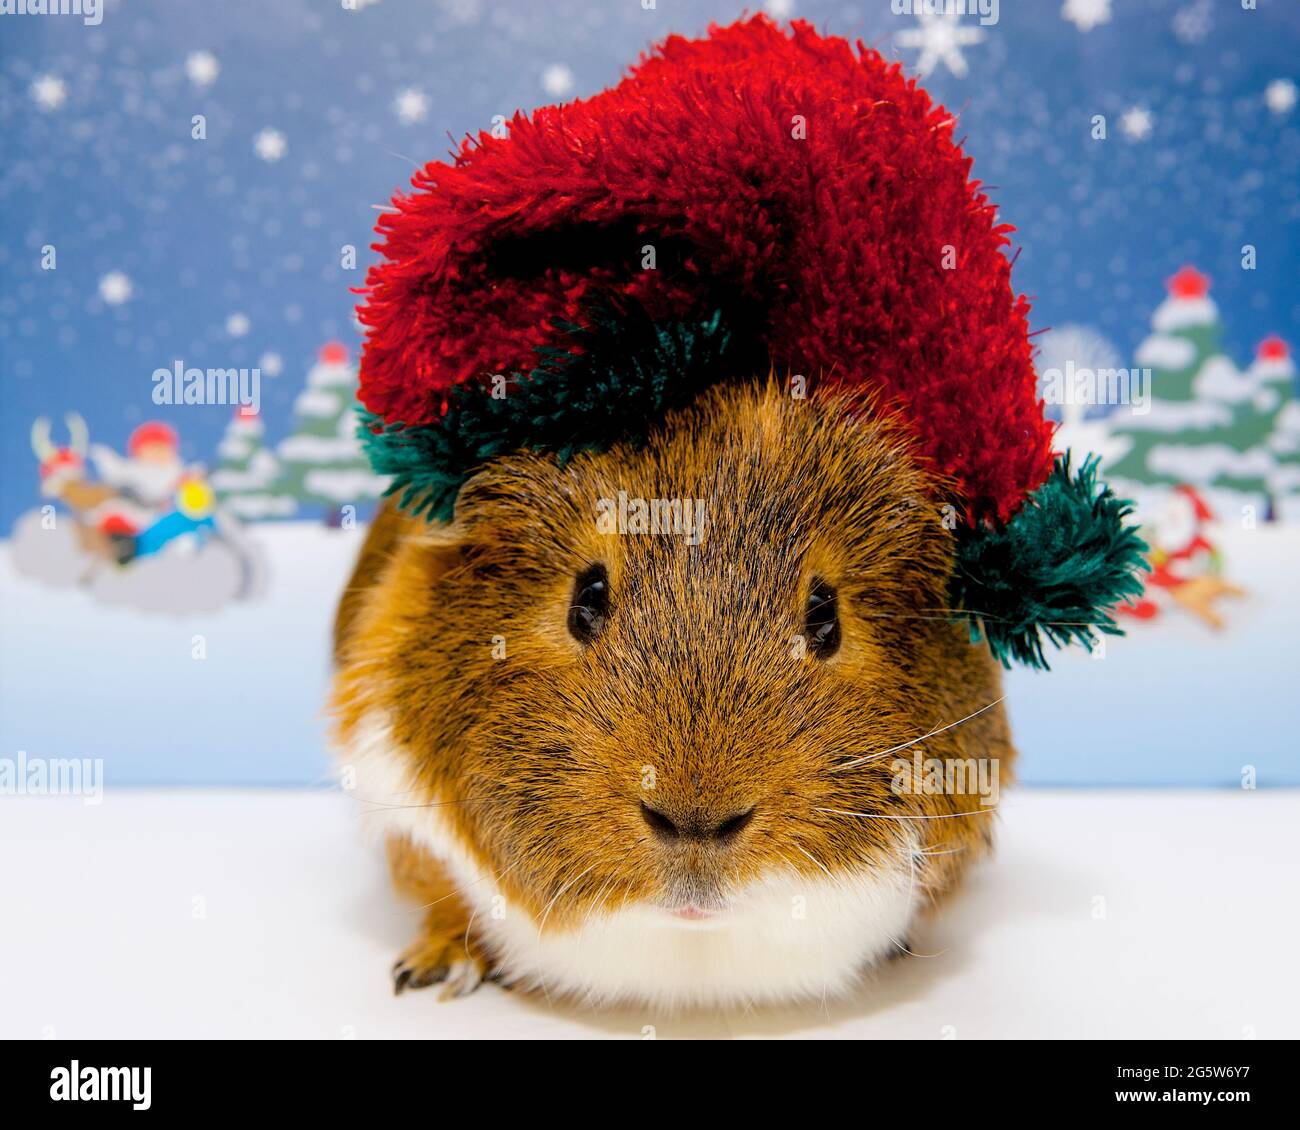 a happy ginger and white guinea pig in a Christmas red and green Santa hat looking at camera in a snowy scene Stock Photo